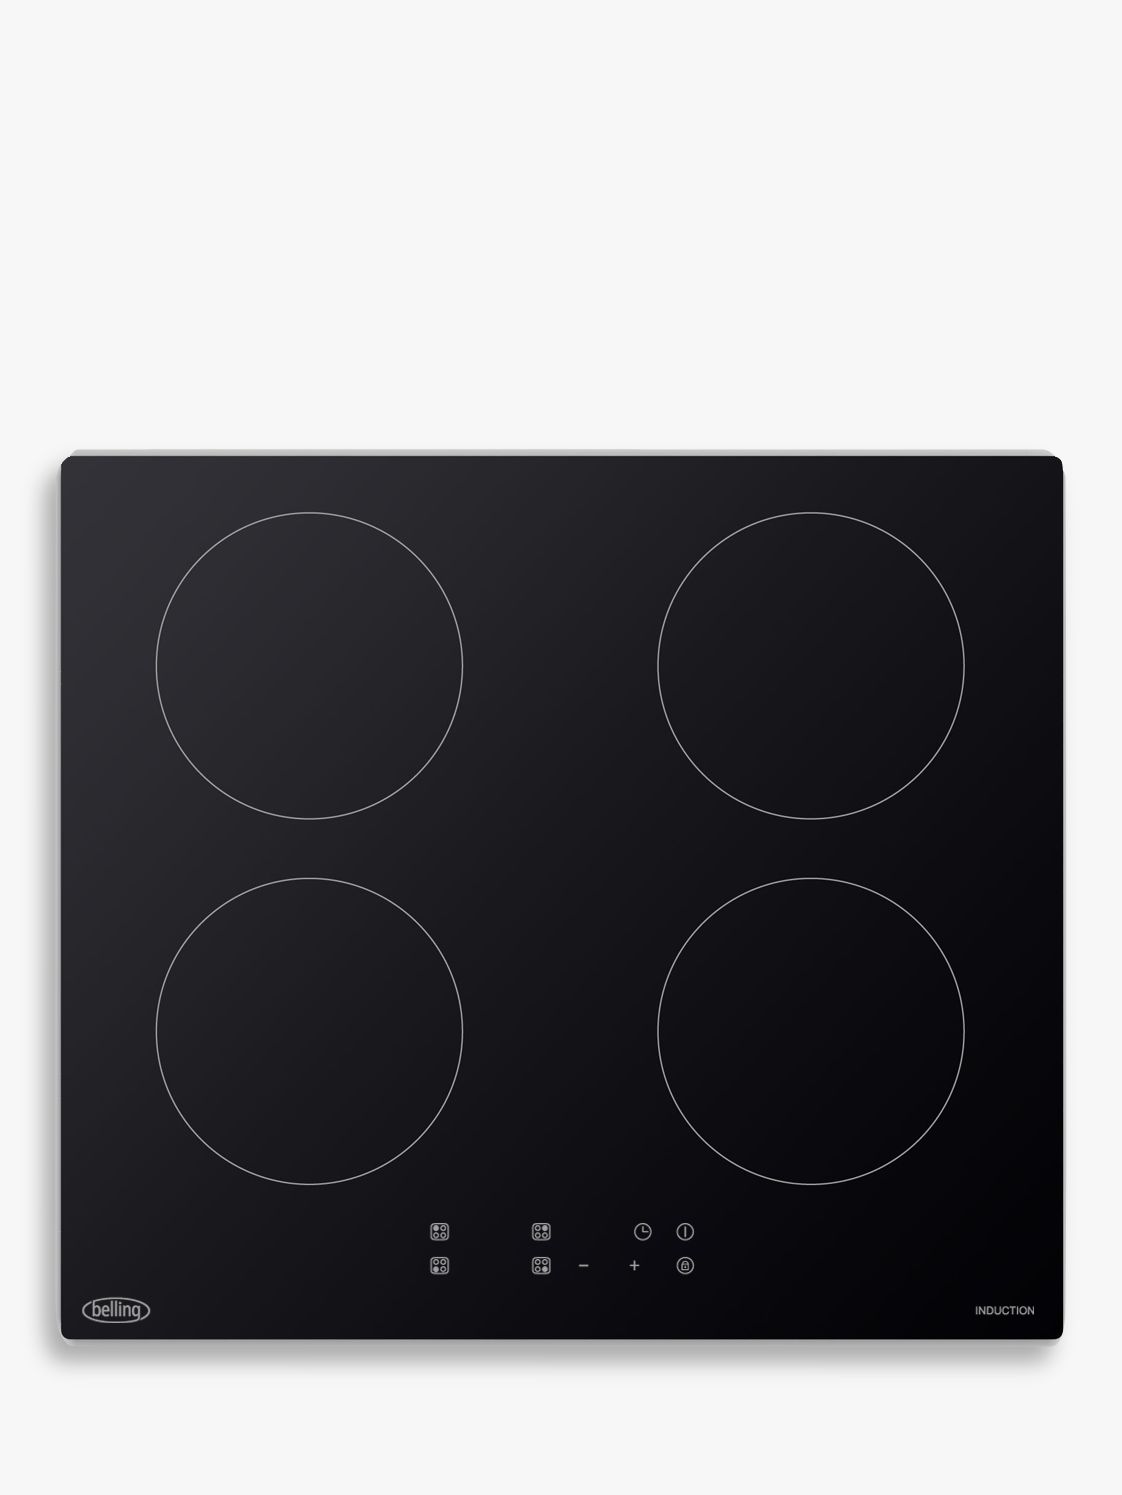 Belling IHT6013 Touch Control Induction Hob, Black